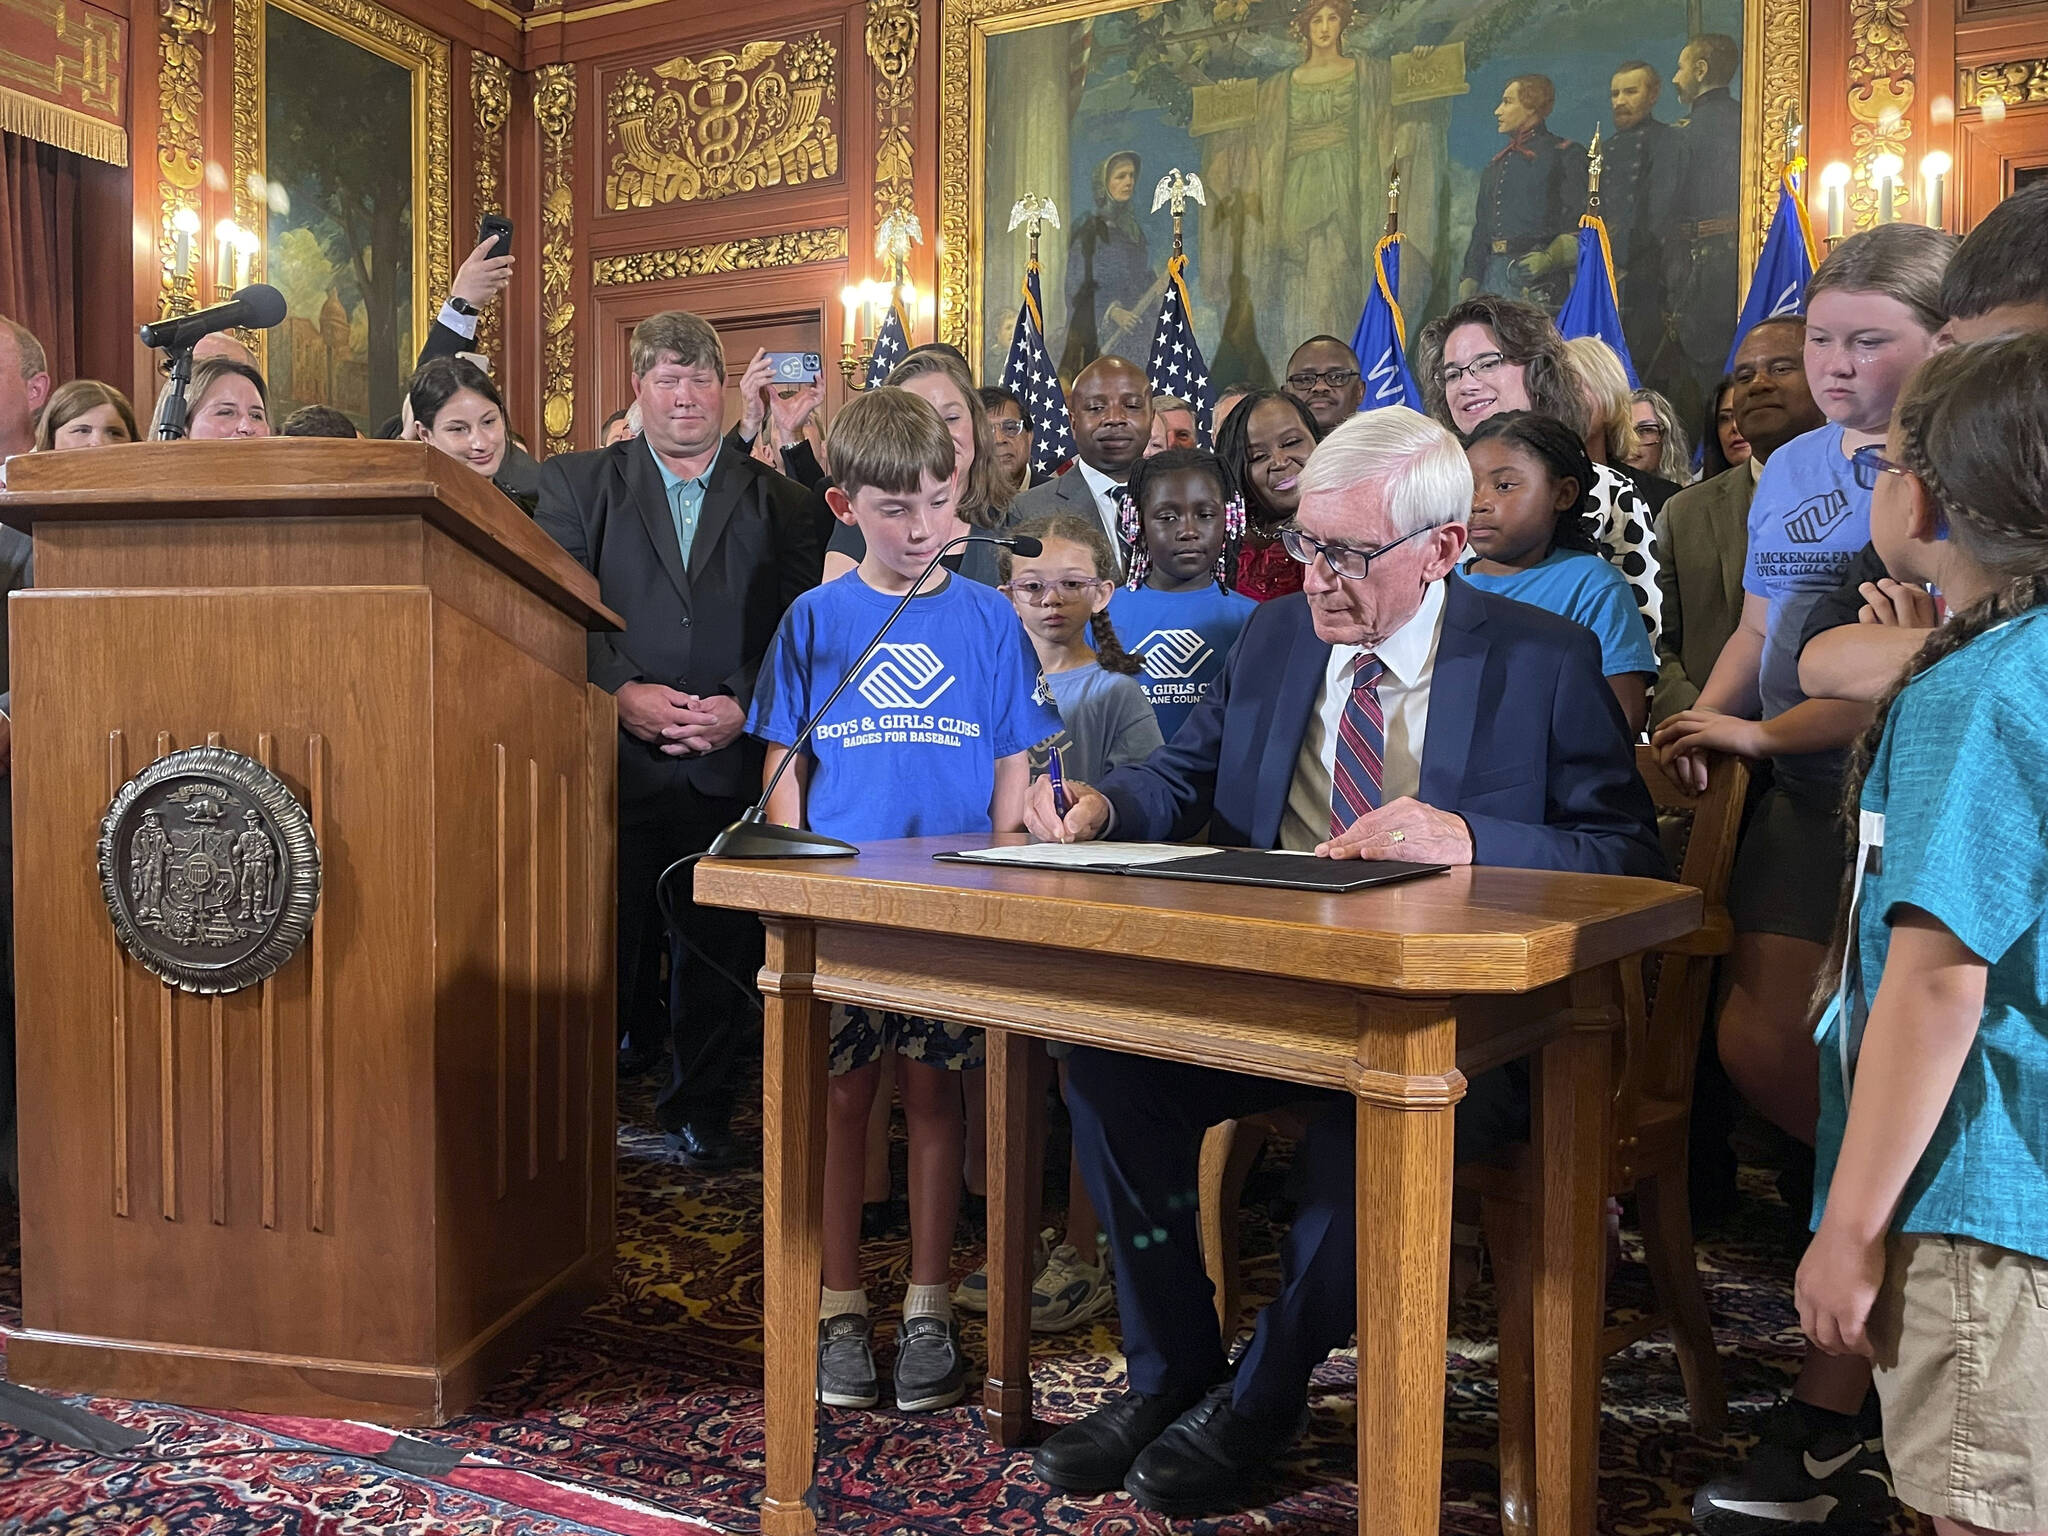 Democratic Wisconsin Gov. Tony Evers signed a two-year spending plan into law Wednesday in Madison, Wis. The budget was authored by Republicans who control the Legislature, but Evers used his partial veto powers to revise portions of it, including locking in annual education funding increases until the year 2425. (AP Photo/Harm Venhuizen)